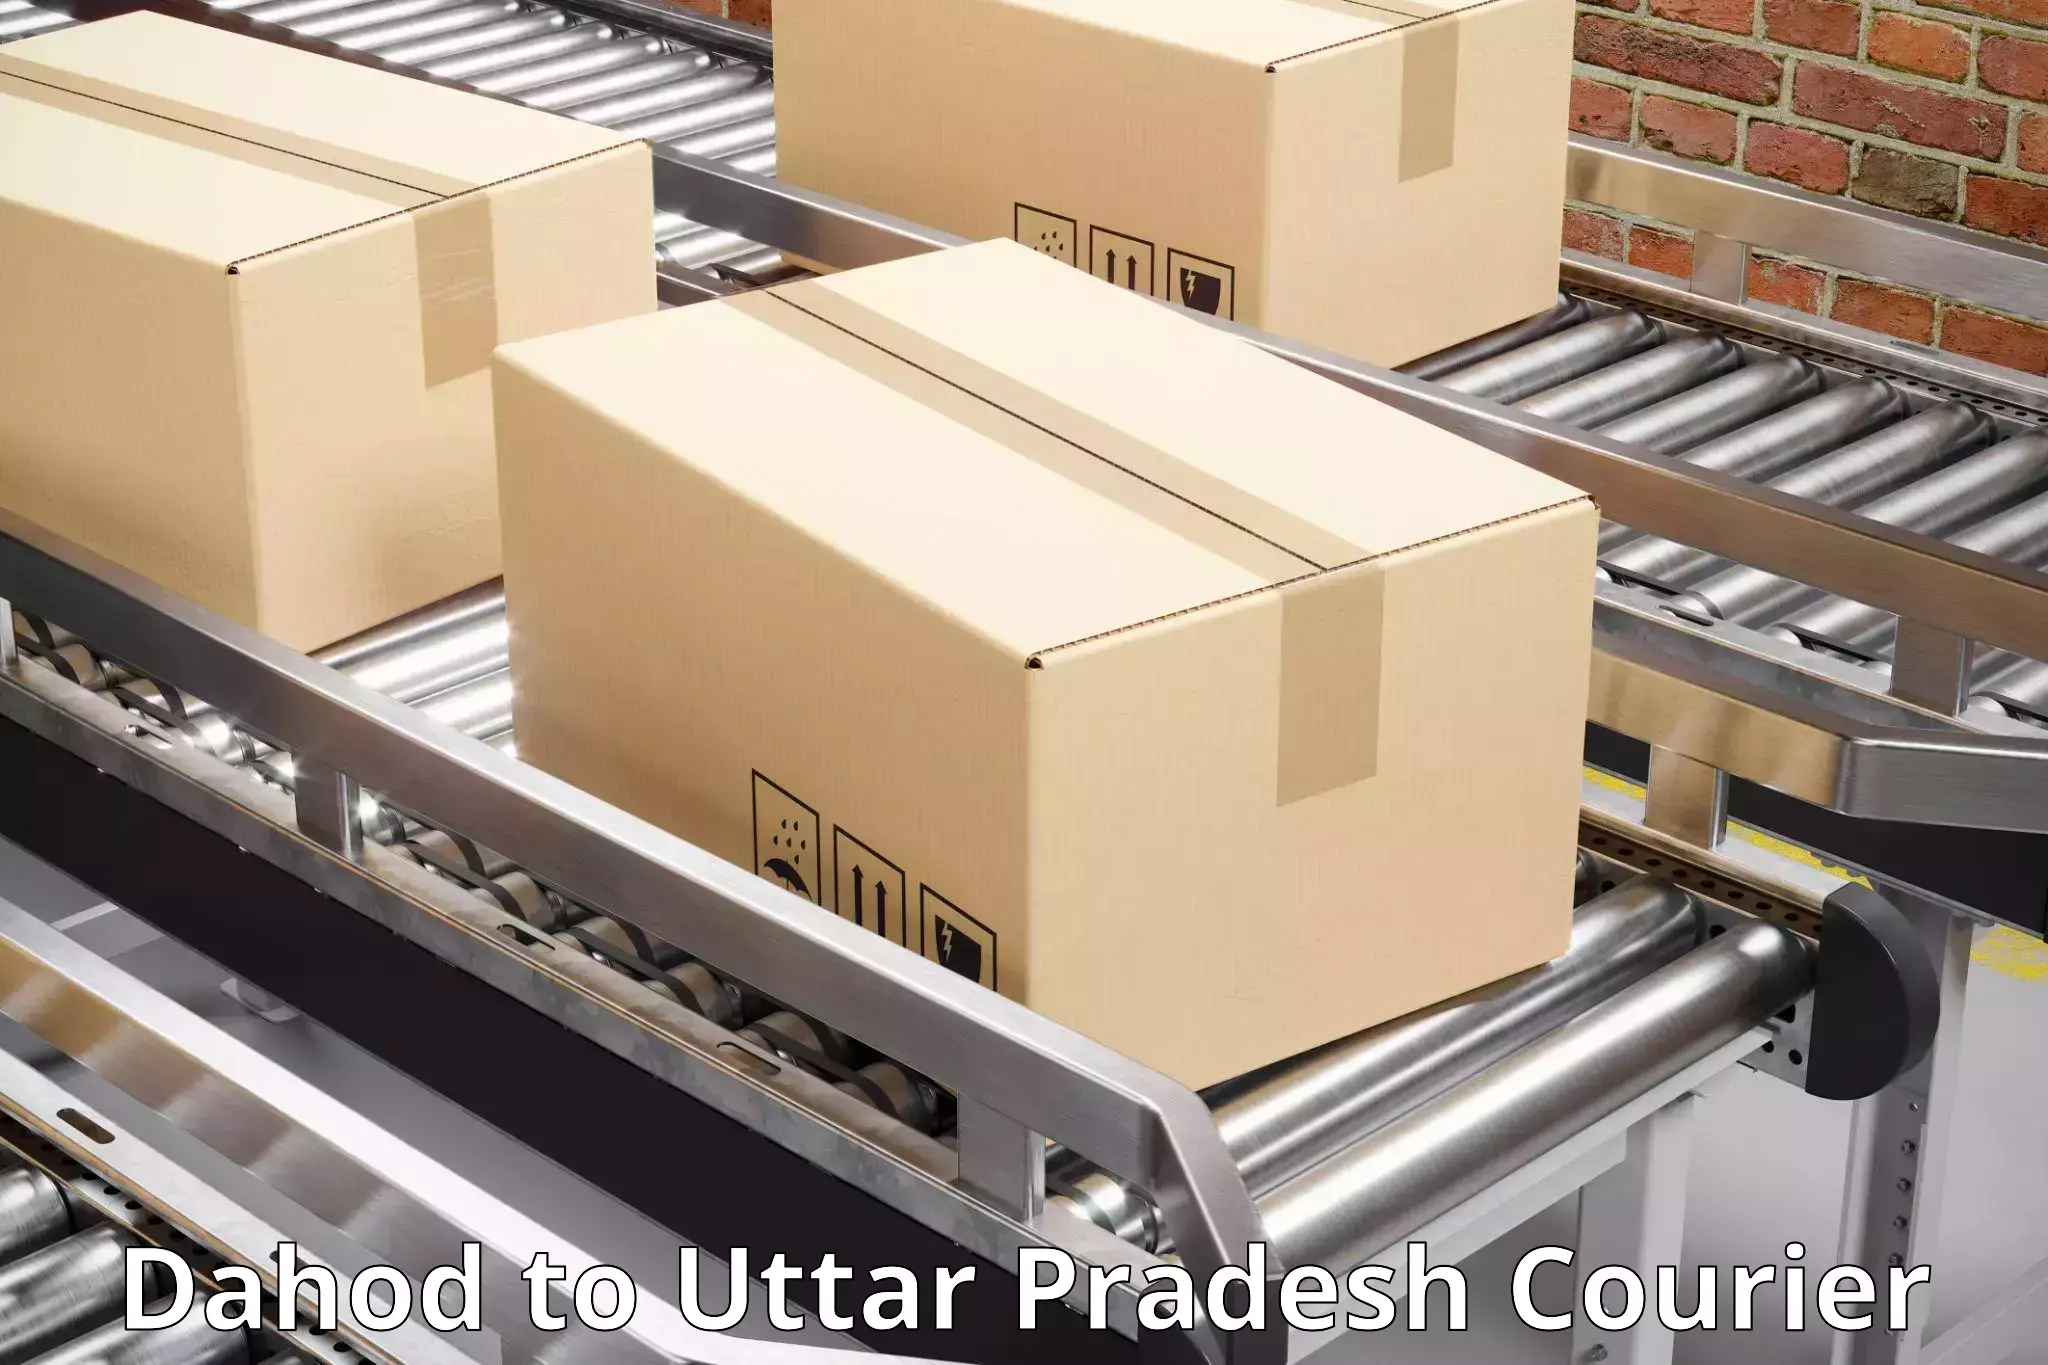 Corporate courier solutions Dahod to Ghaziabad